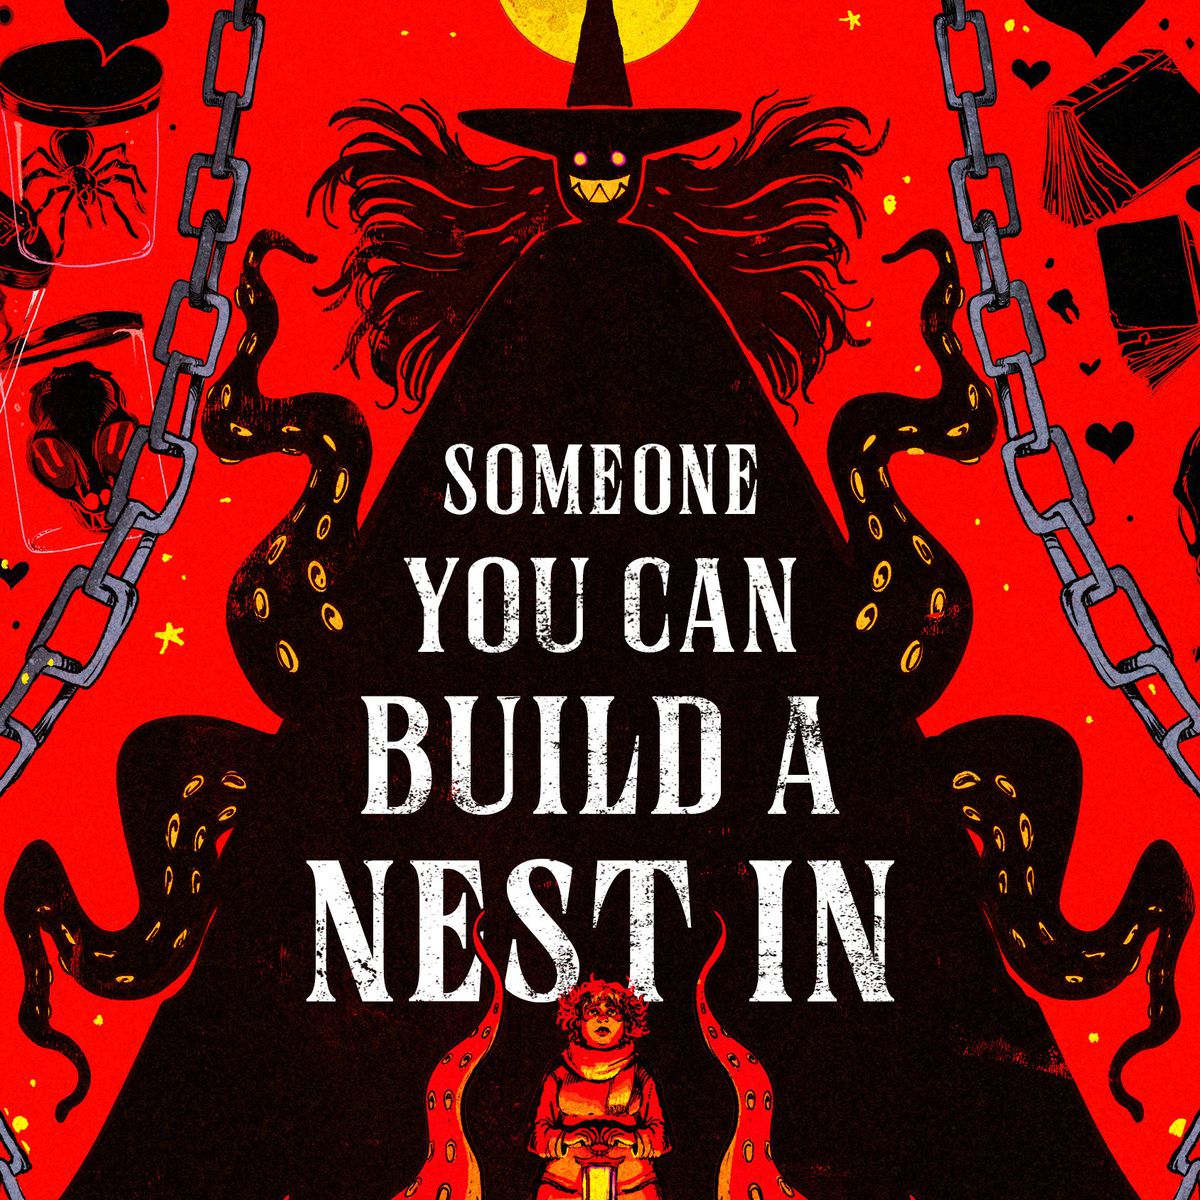 The cover of John Wiswell’s novel Someone You Can Build A Nest In, showing a grinning black shadowy figure in a pointed witch’s hat looming above a small female figure in red light, holding a lantern and surrounded by red tentacles. This version has the title and author’s name.